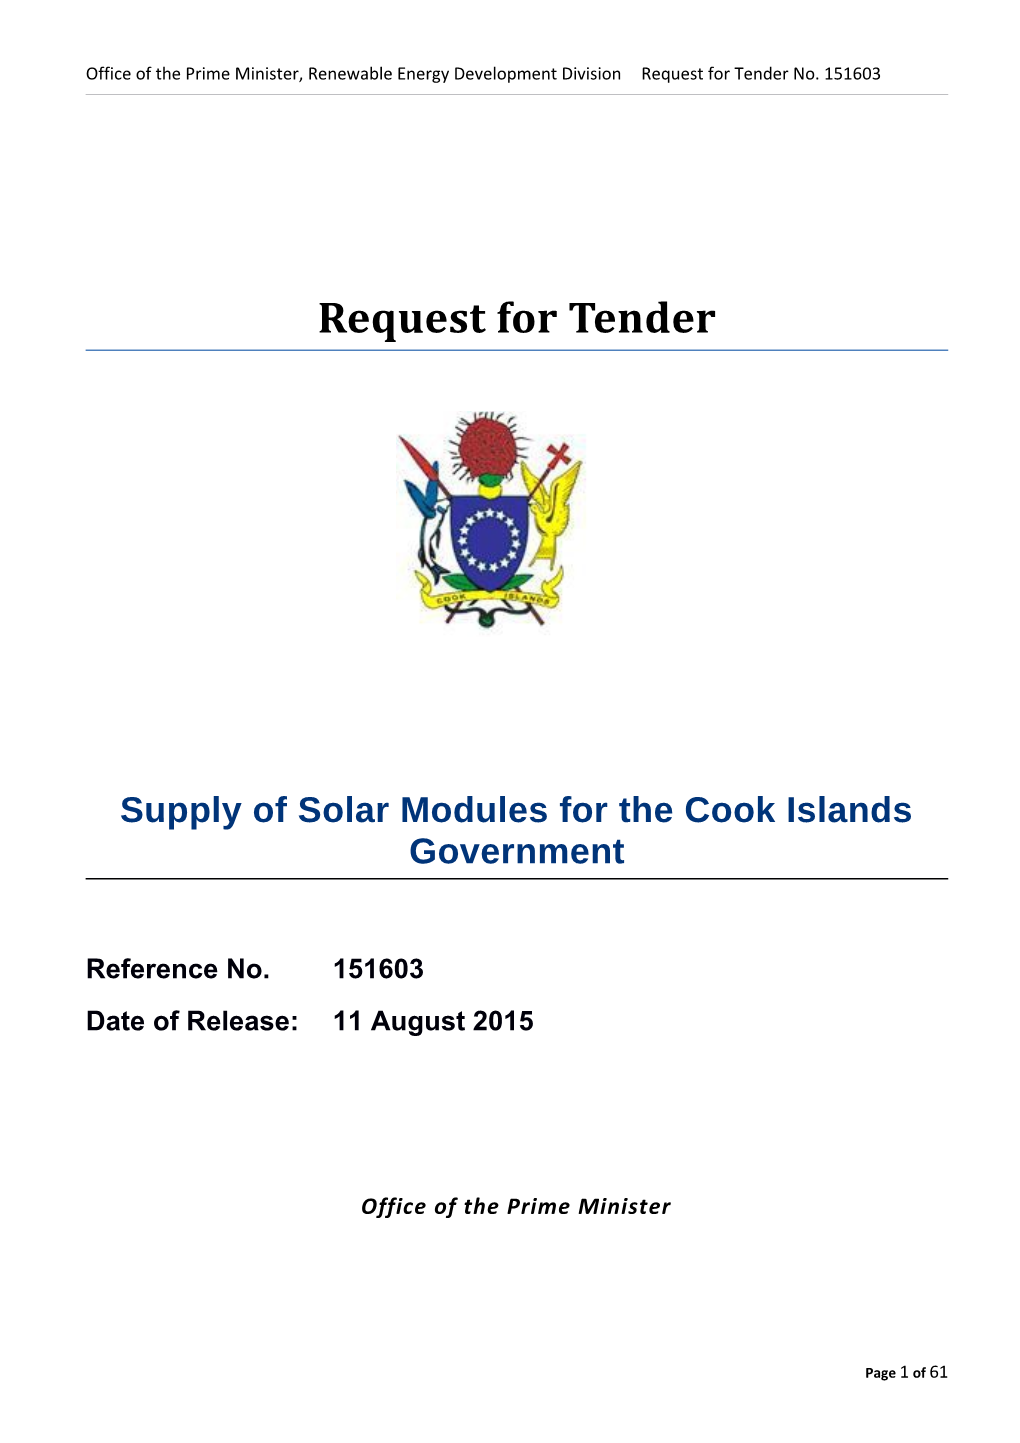 Supply of Solar Modules for the Cook Islands Government